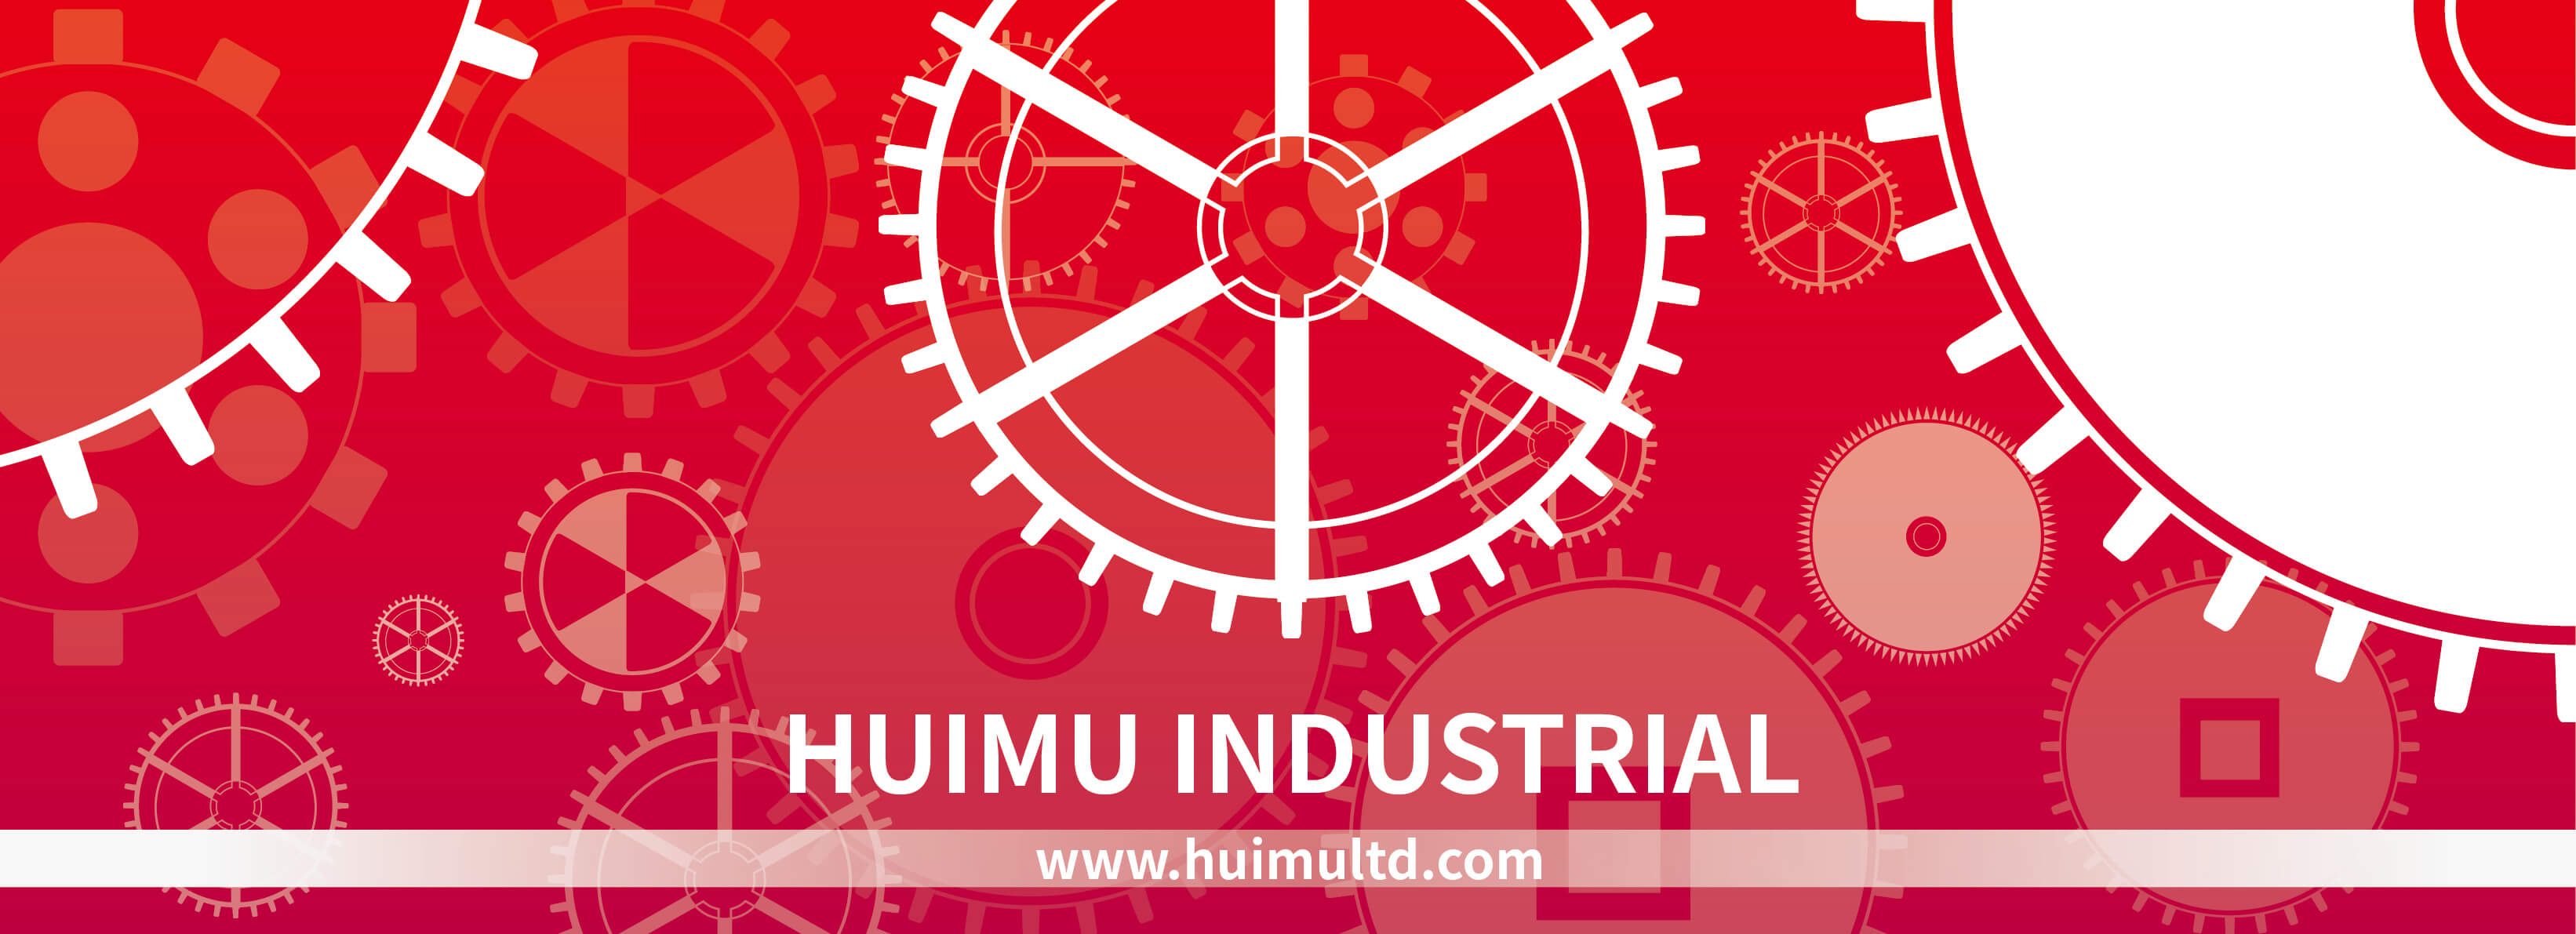 Industrial Processing banner